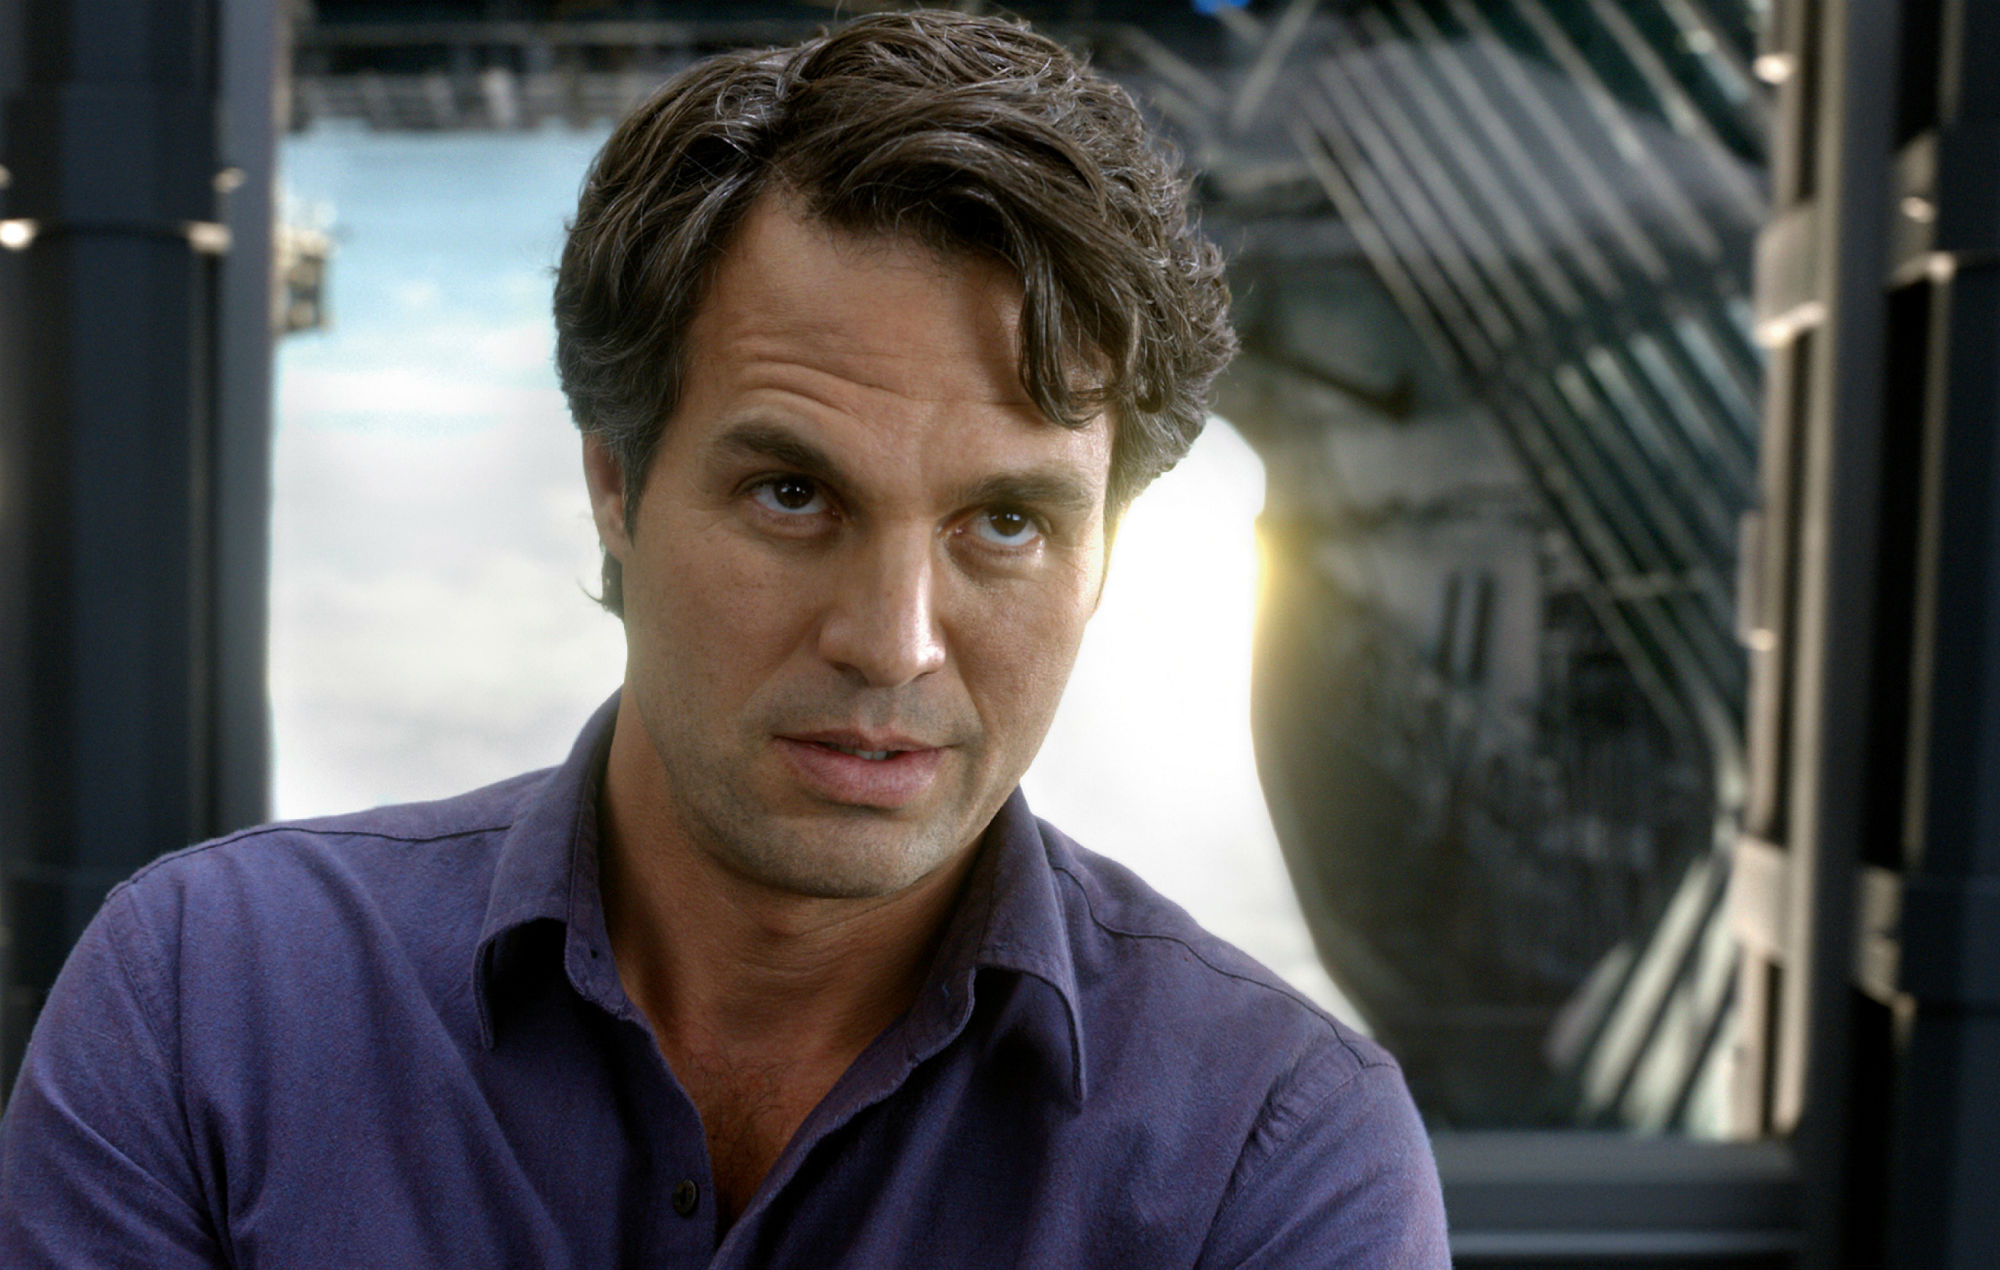 Know More About Mark Ruffalo: